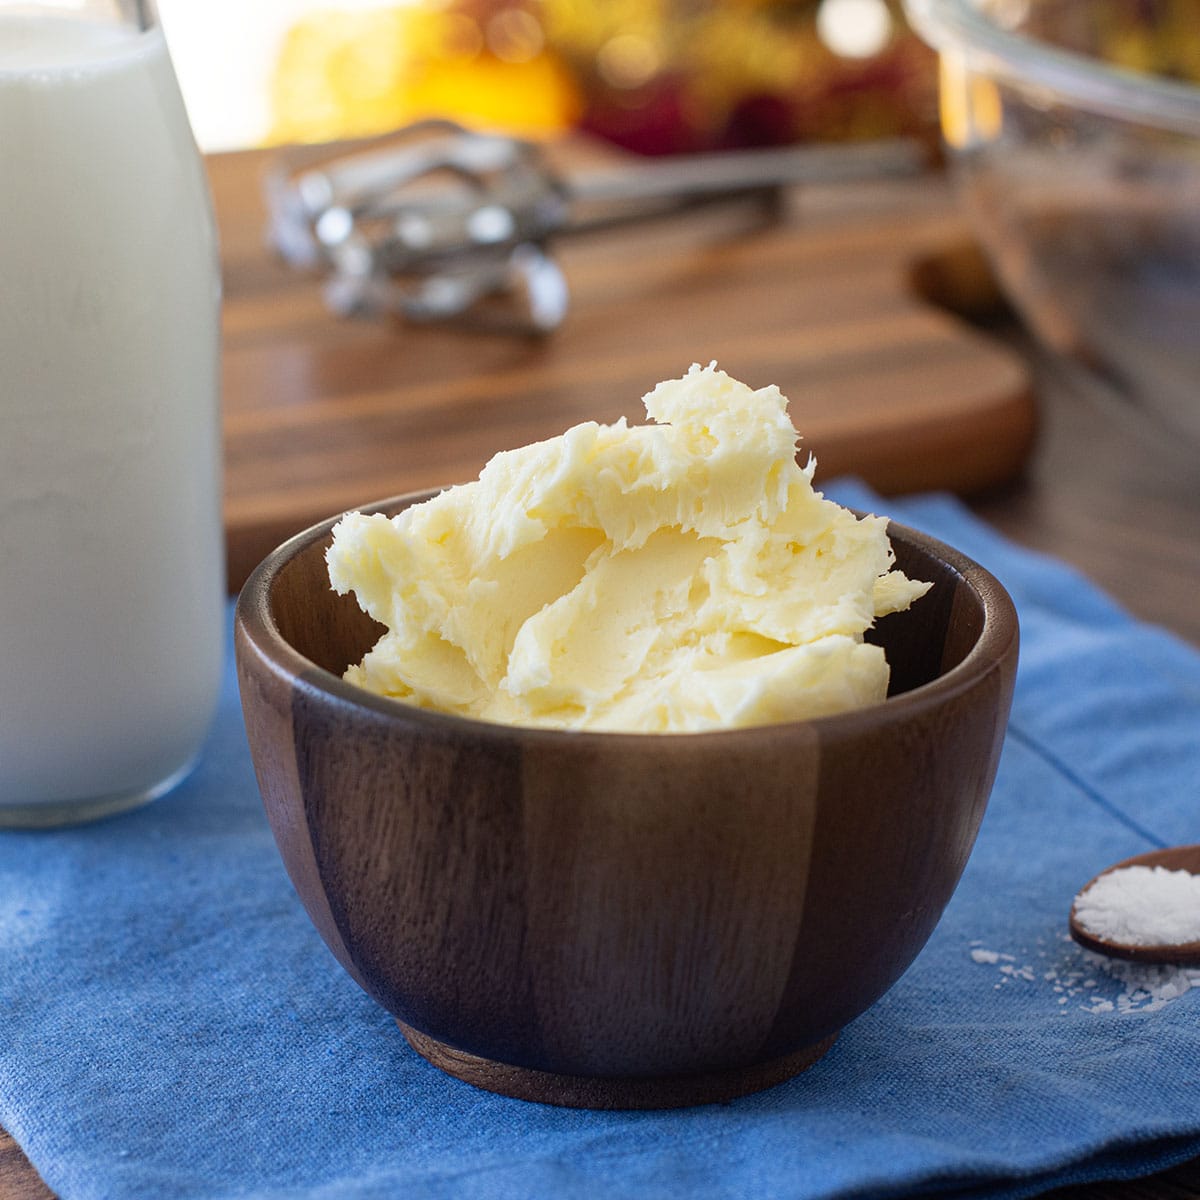 Wooden dish of homemade butter, spoon of salt, and glass jar of cream.